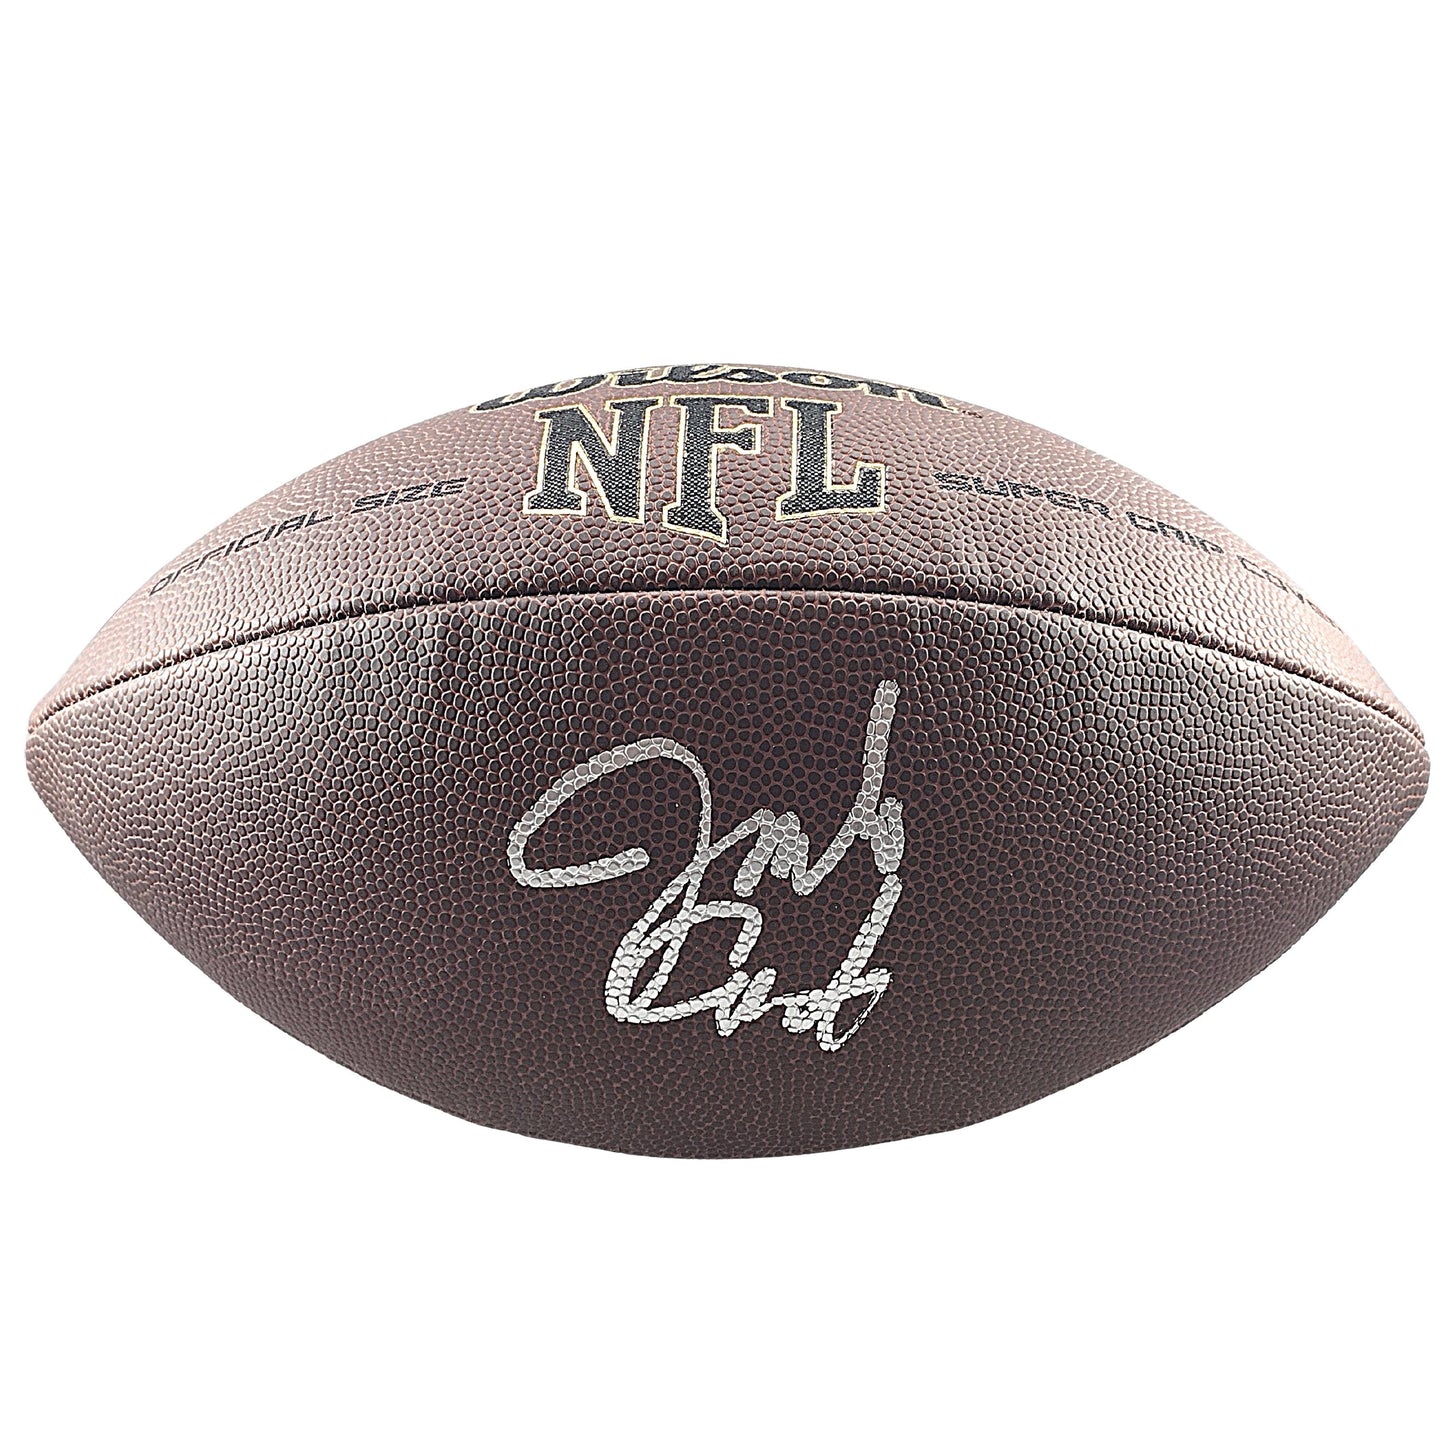 Footballs- Autographed- Jim Covert Signed NFL Wilson Super Grip Football Pittsburgh Panthers Beckett BAS Authentication 102